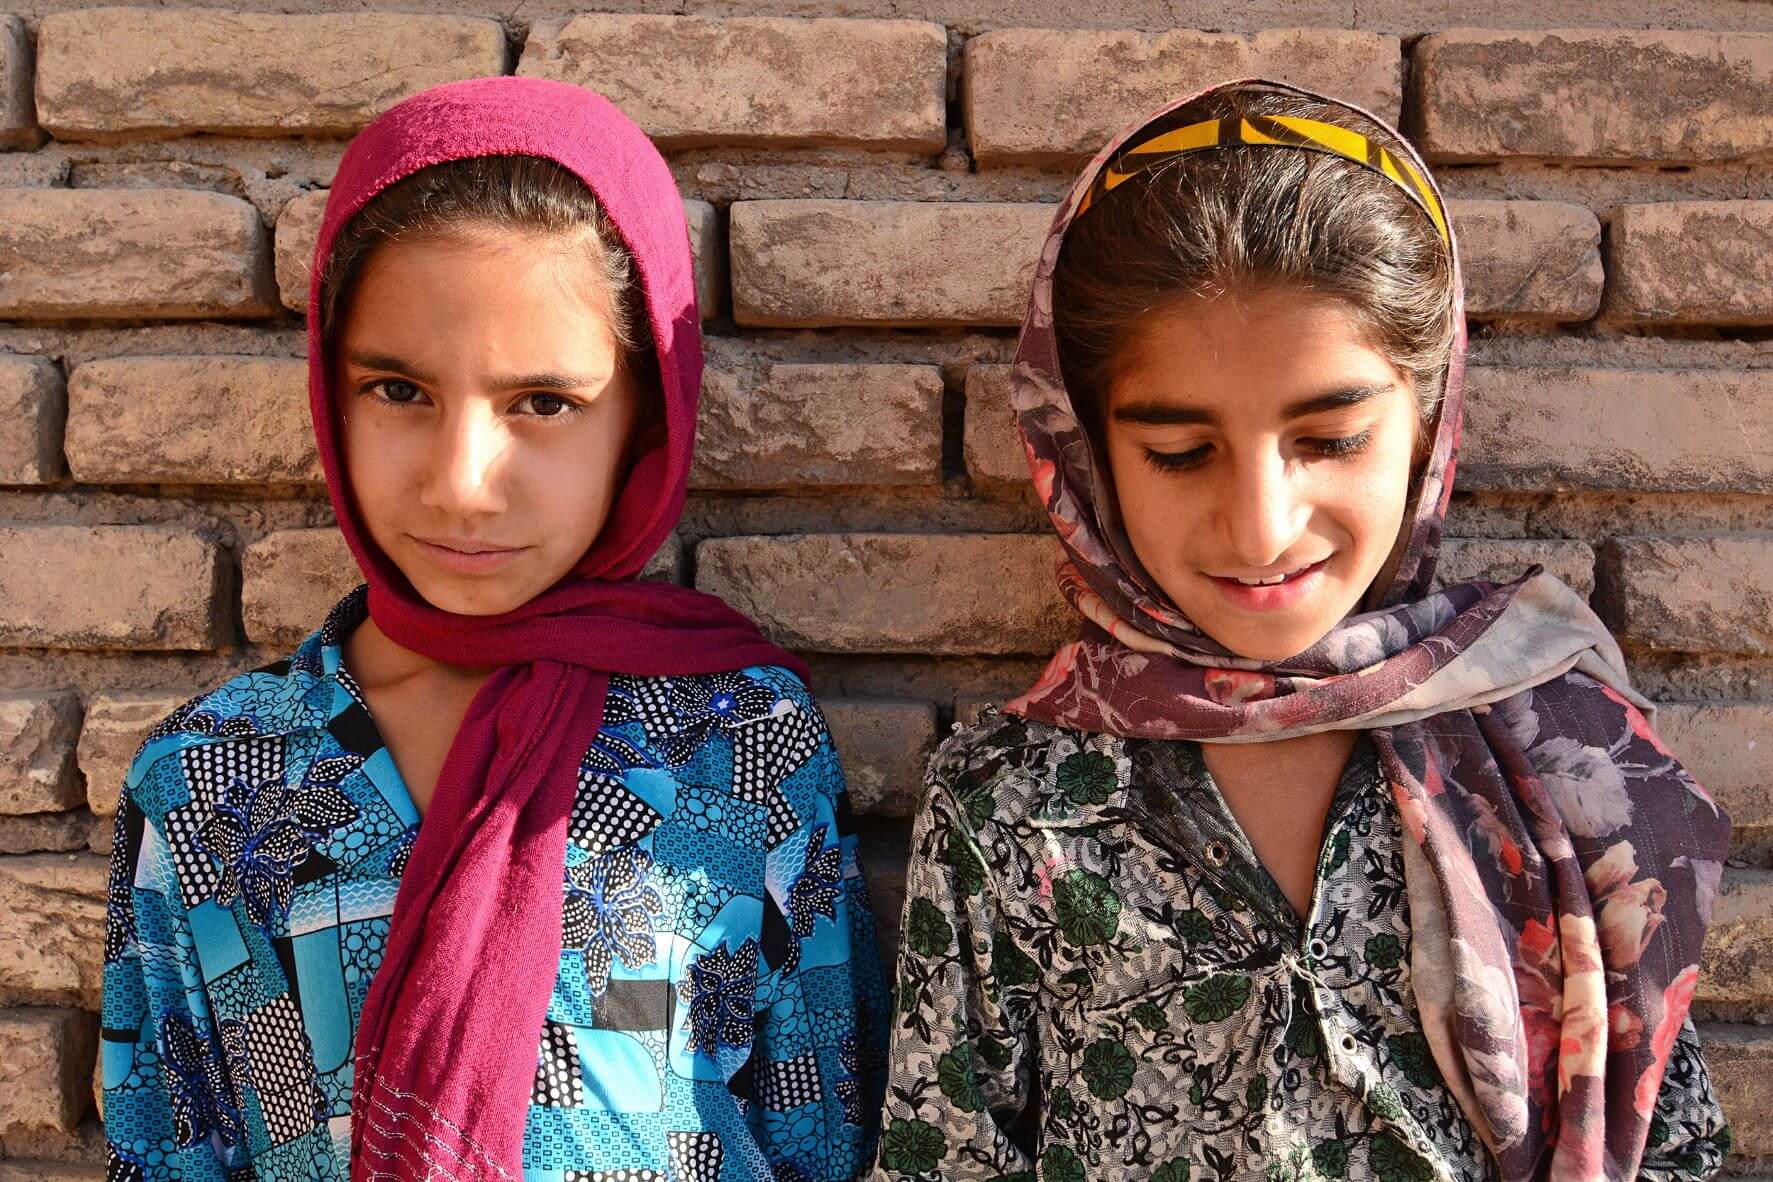 Two young Afghan girls stand against a brick wall